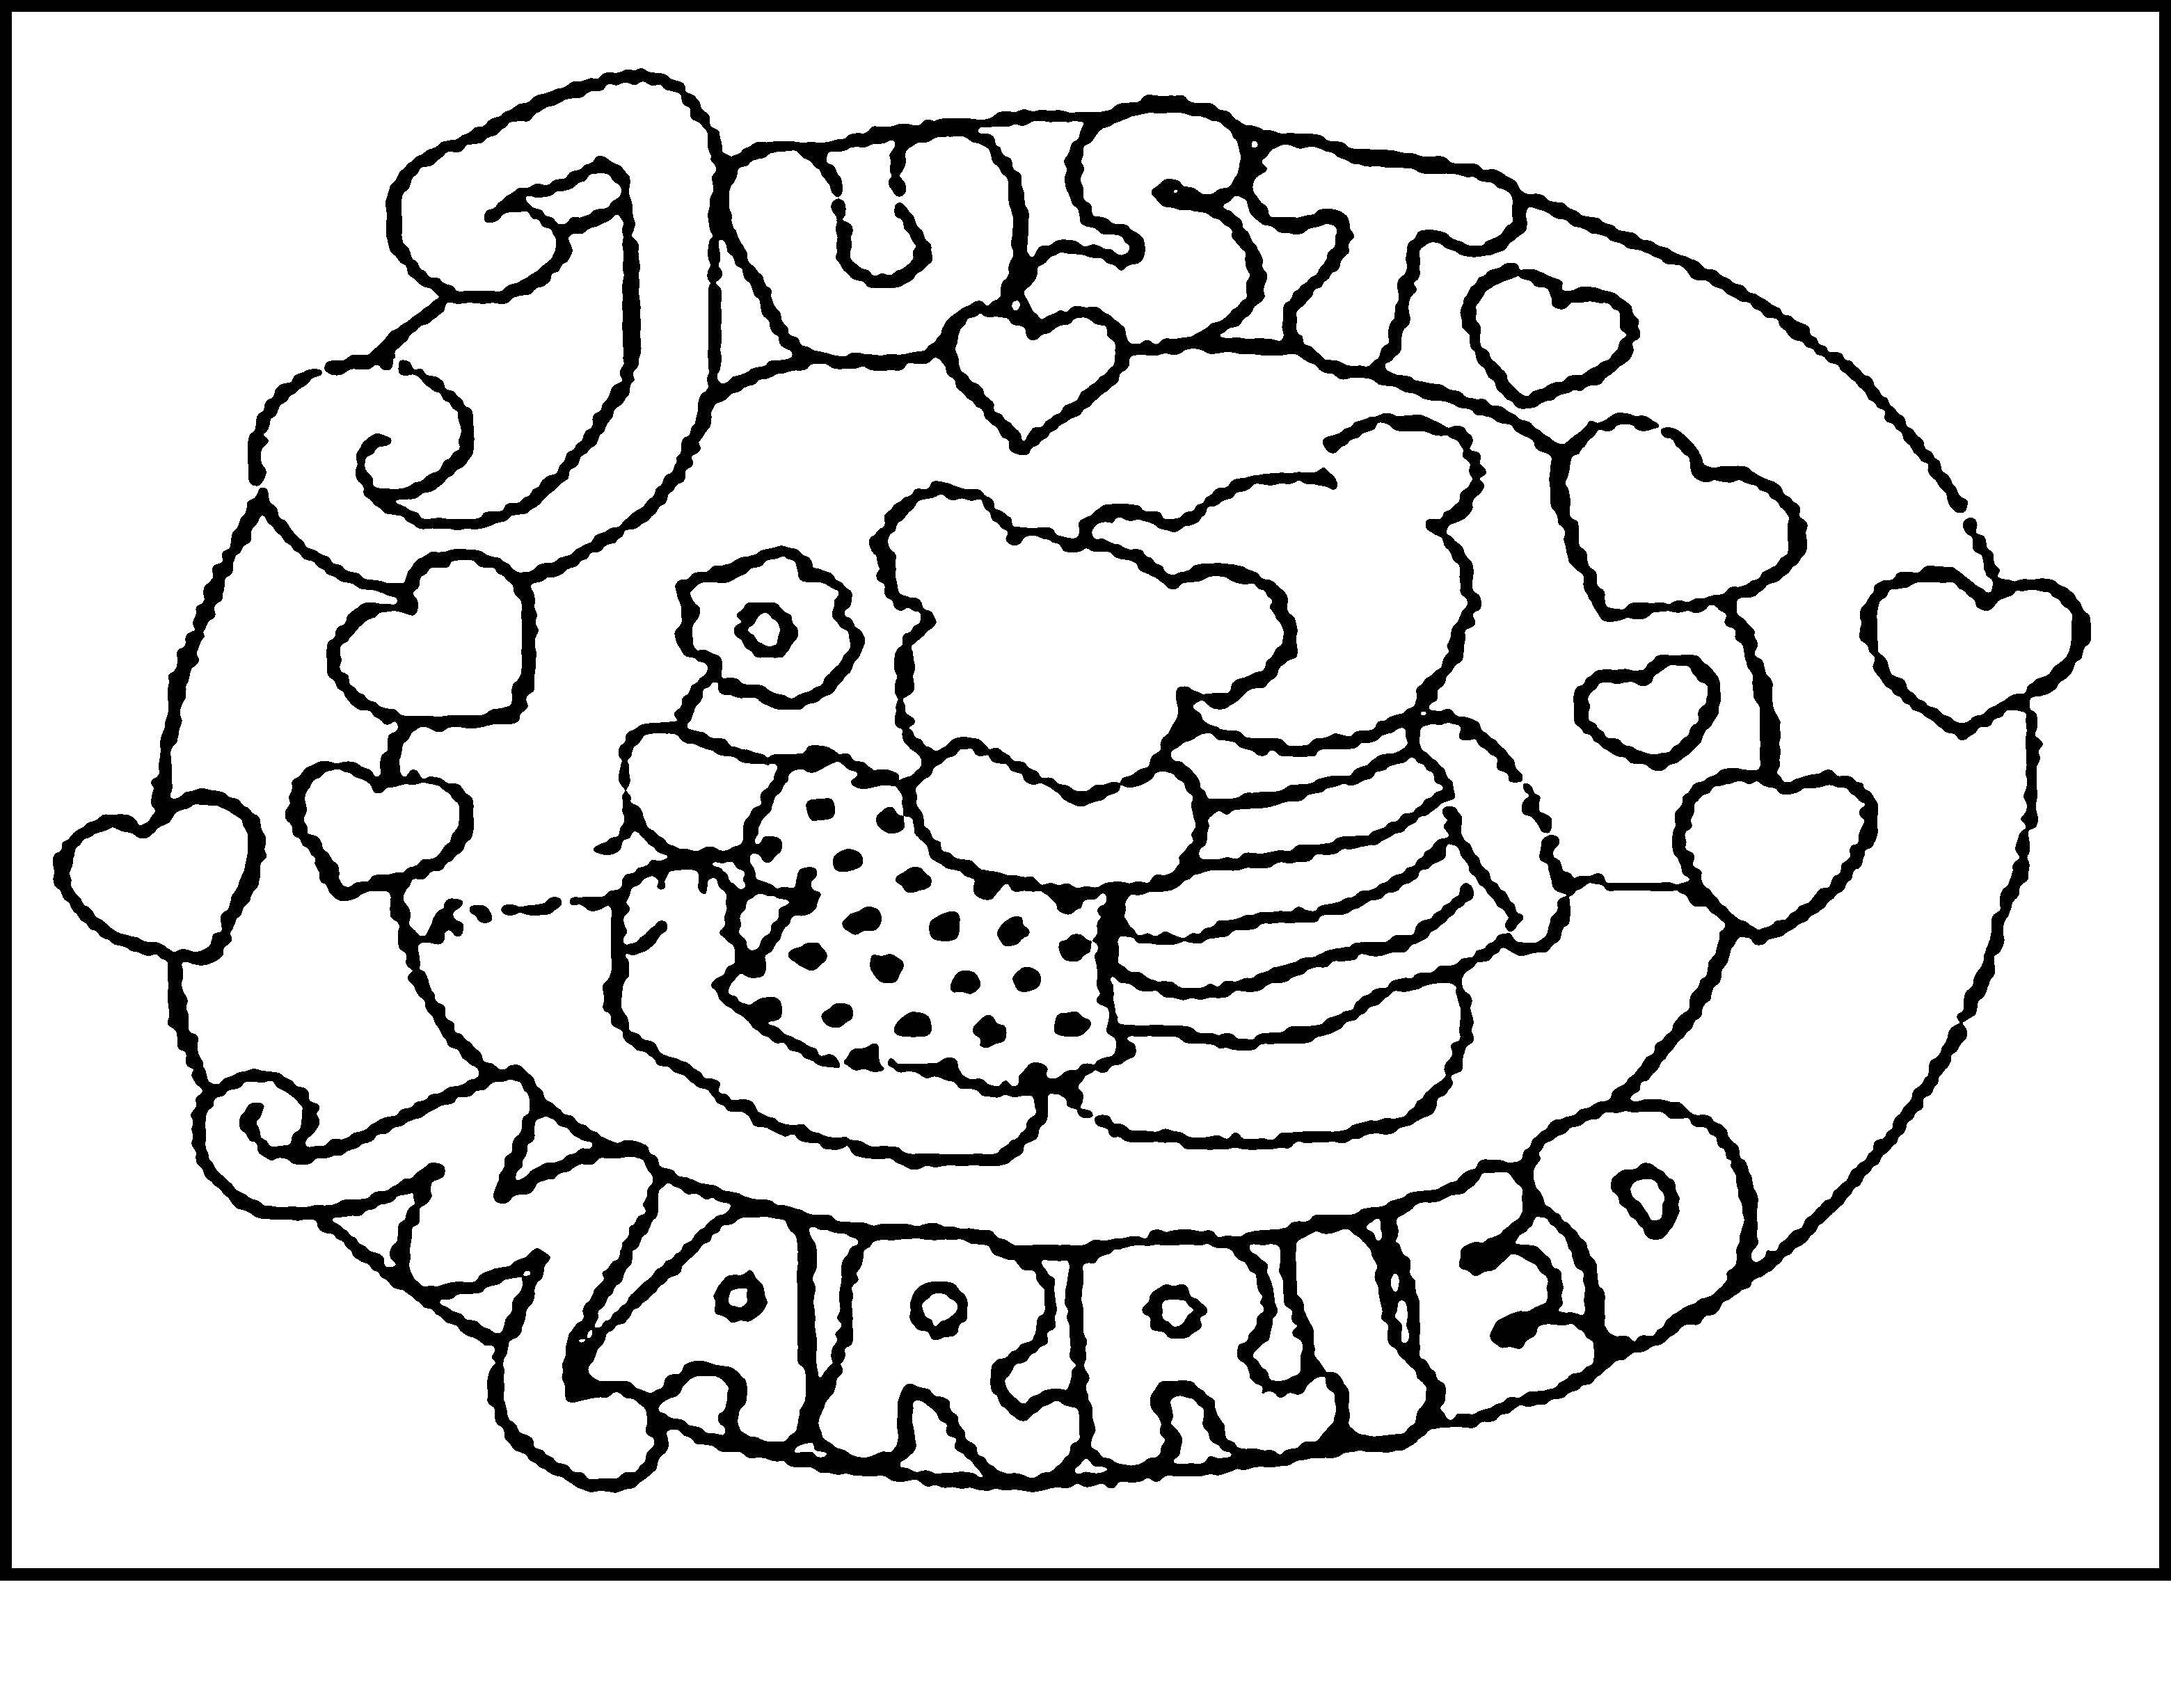 Coloring Just married. Category Wedding. Tags:  Wedding, dress, bride, groom.